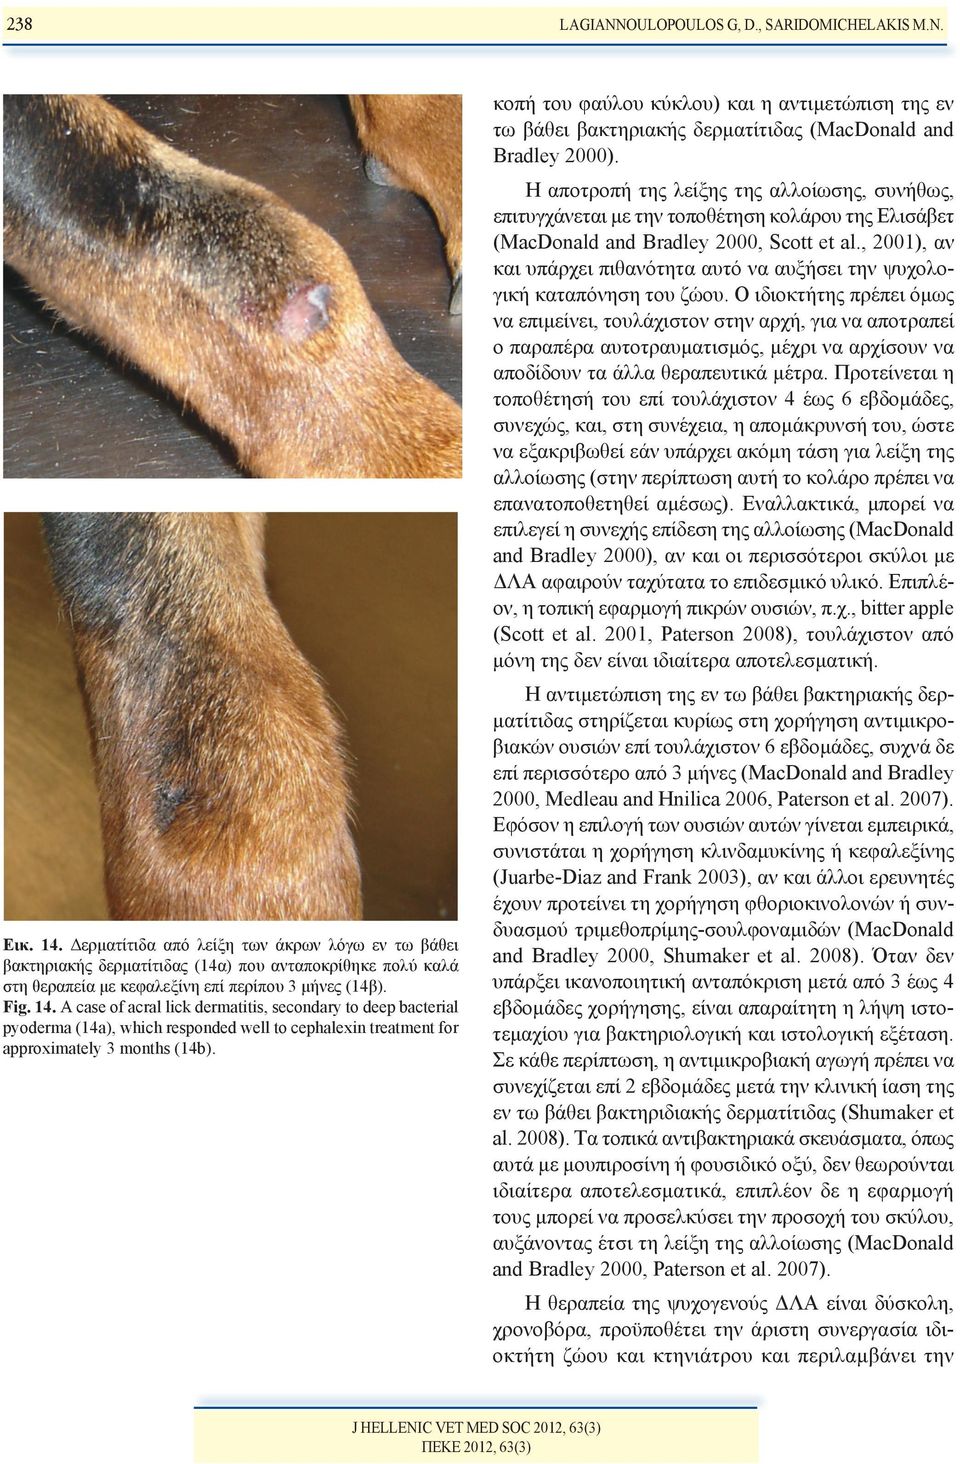 A case of acral lick dermatitis, secondary to deep bacterial pyoderma (14a), which responded well to cephalexin treatment for approximately 3 months (14b).